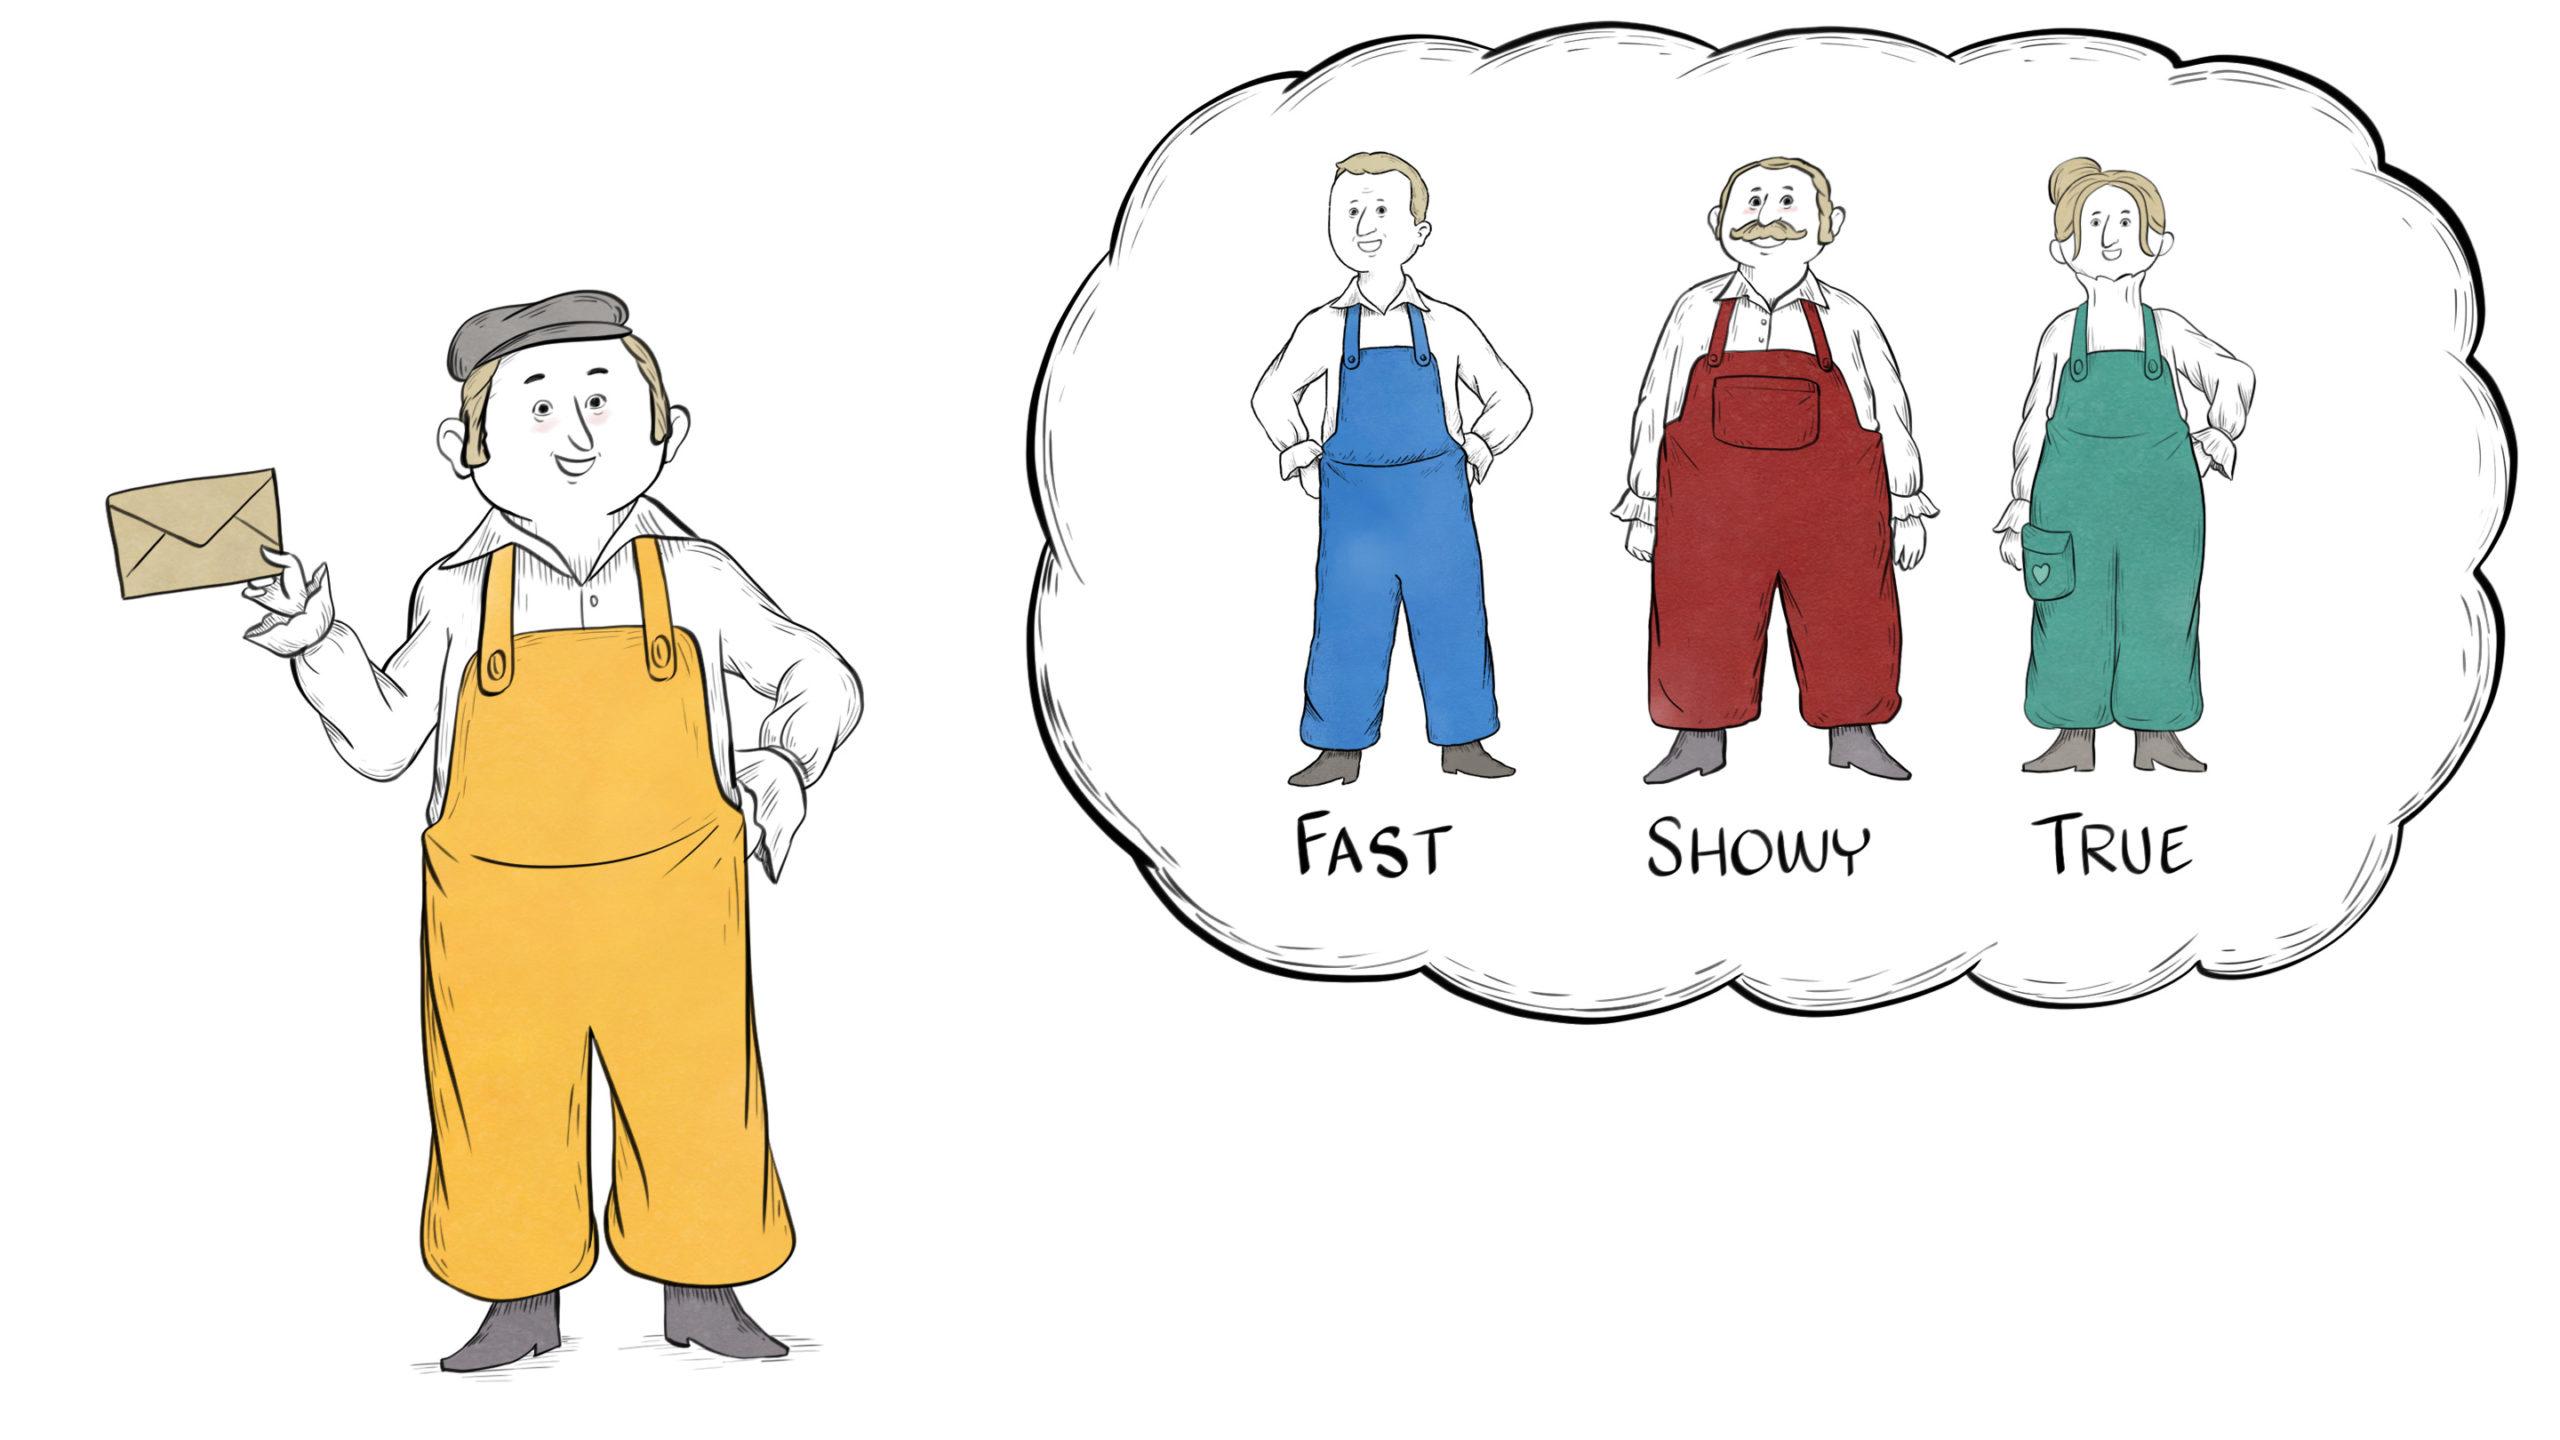 Which farmer are you? Fast, Showy, or True?